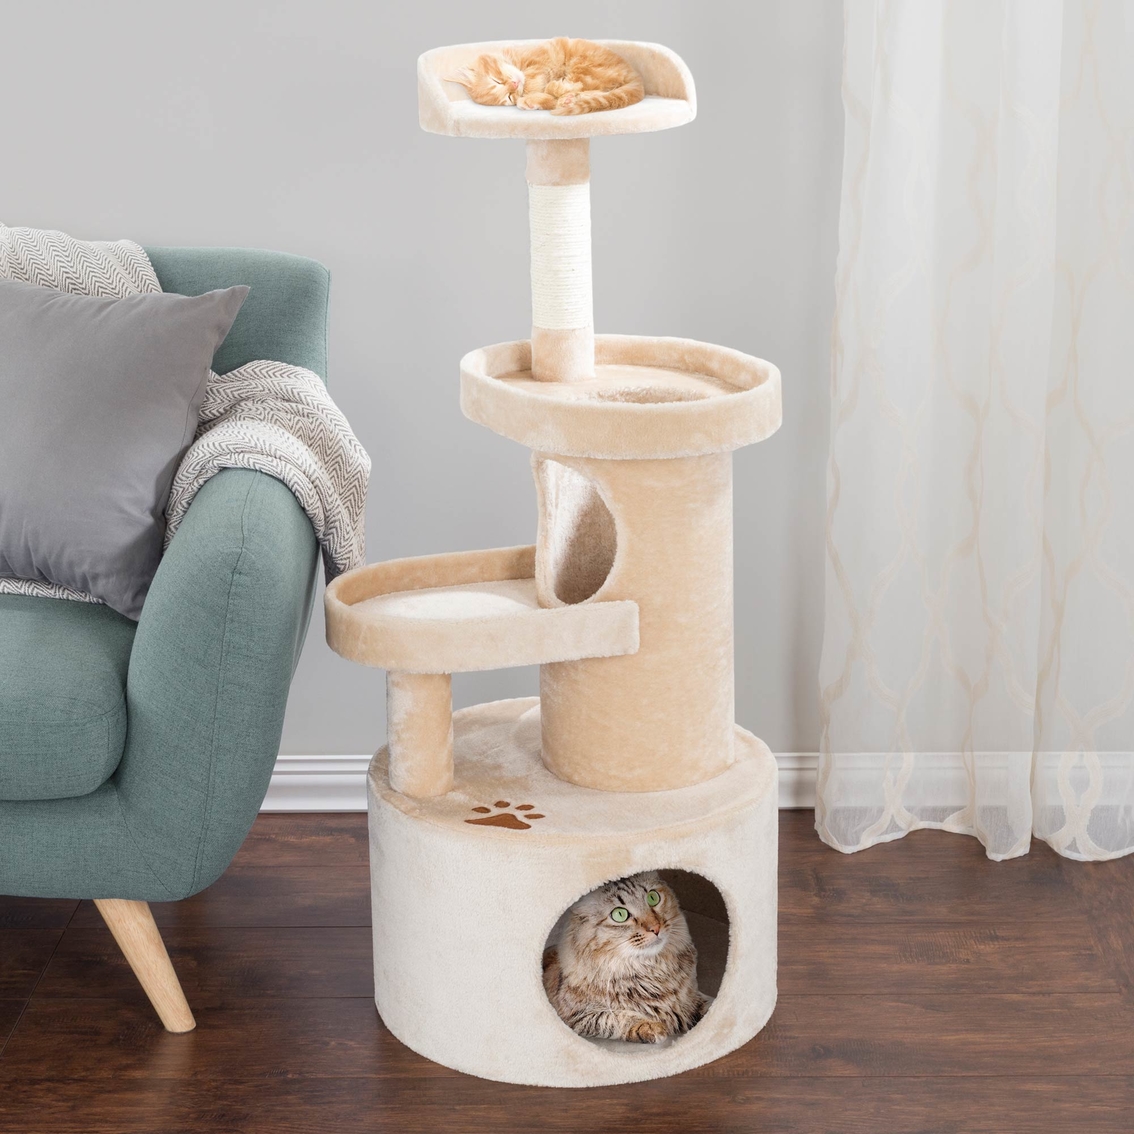 Petmaker 4 Tier Cat Tree Condo with Tunnel and Scratching Post - Image 4 of 6